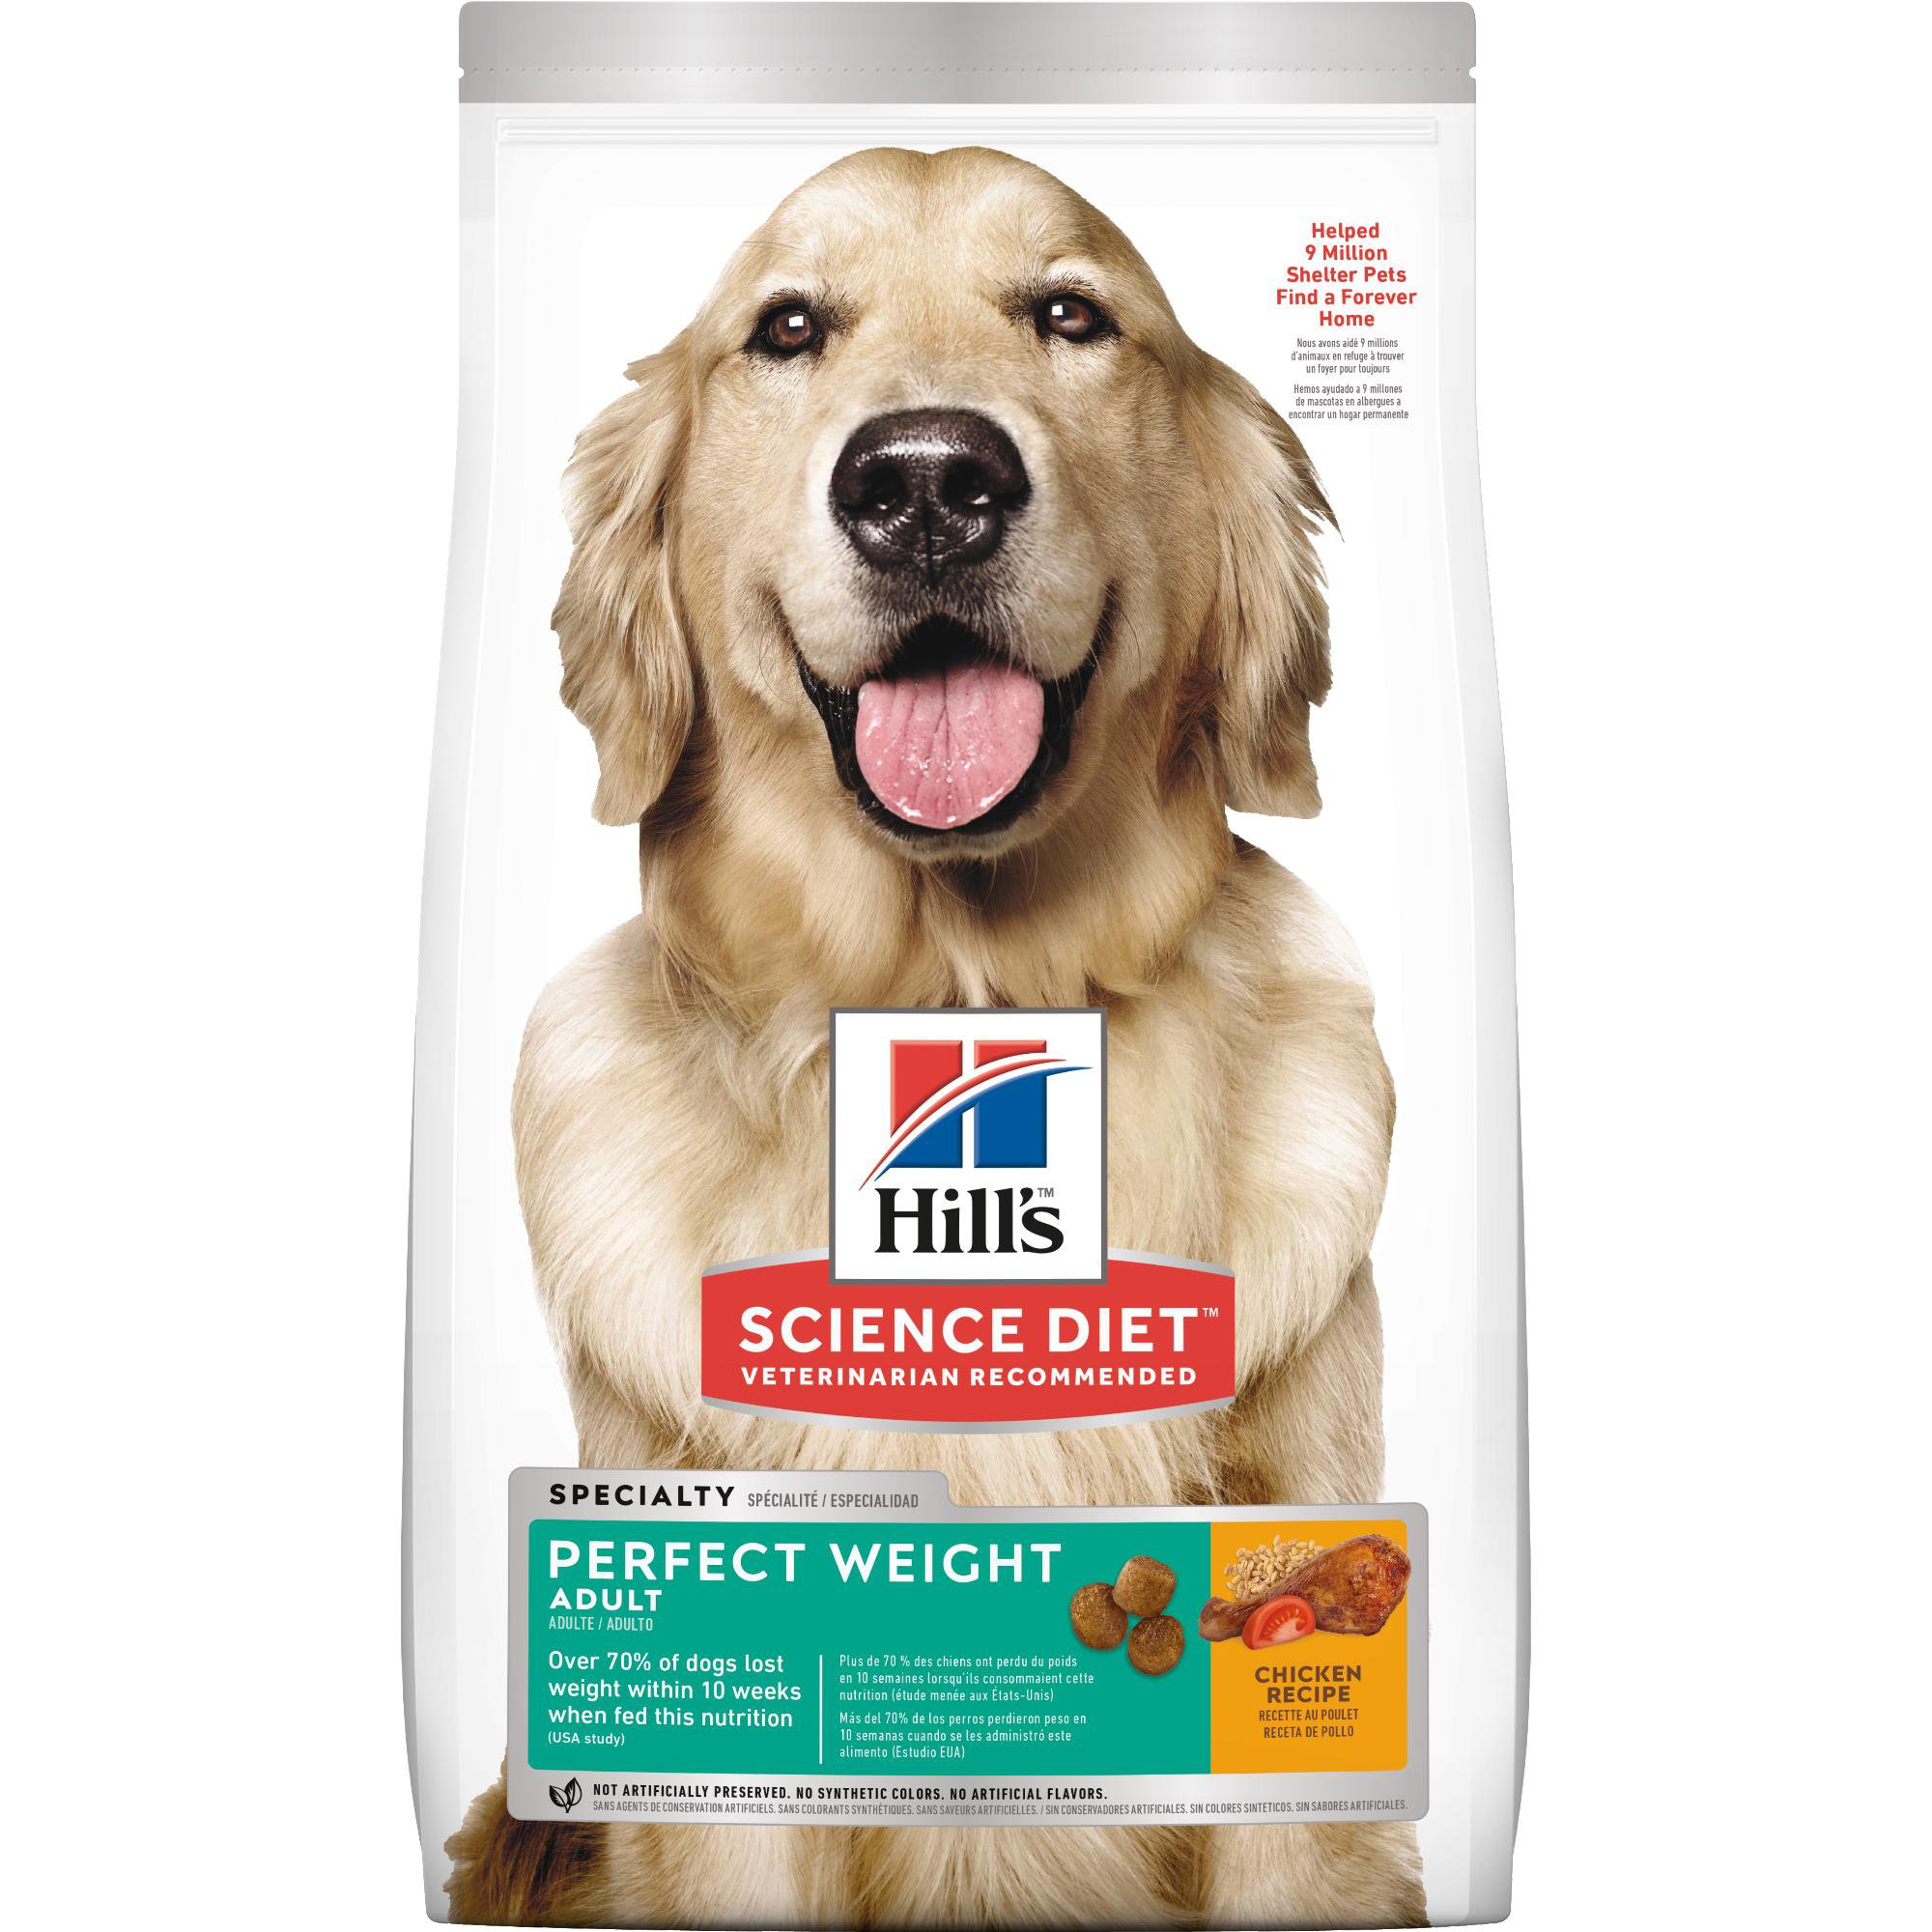 upc-052742001838-hill-s-science-diet-perfect-weight-adult-dog-food